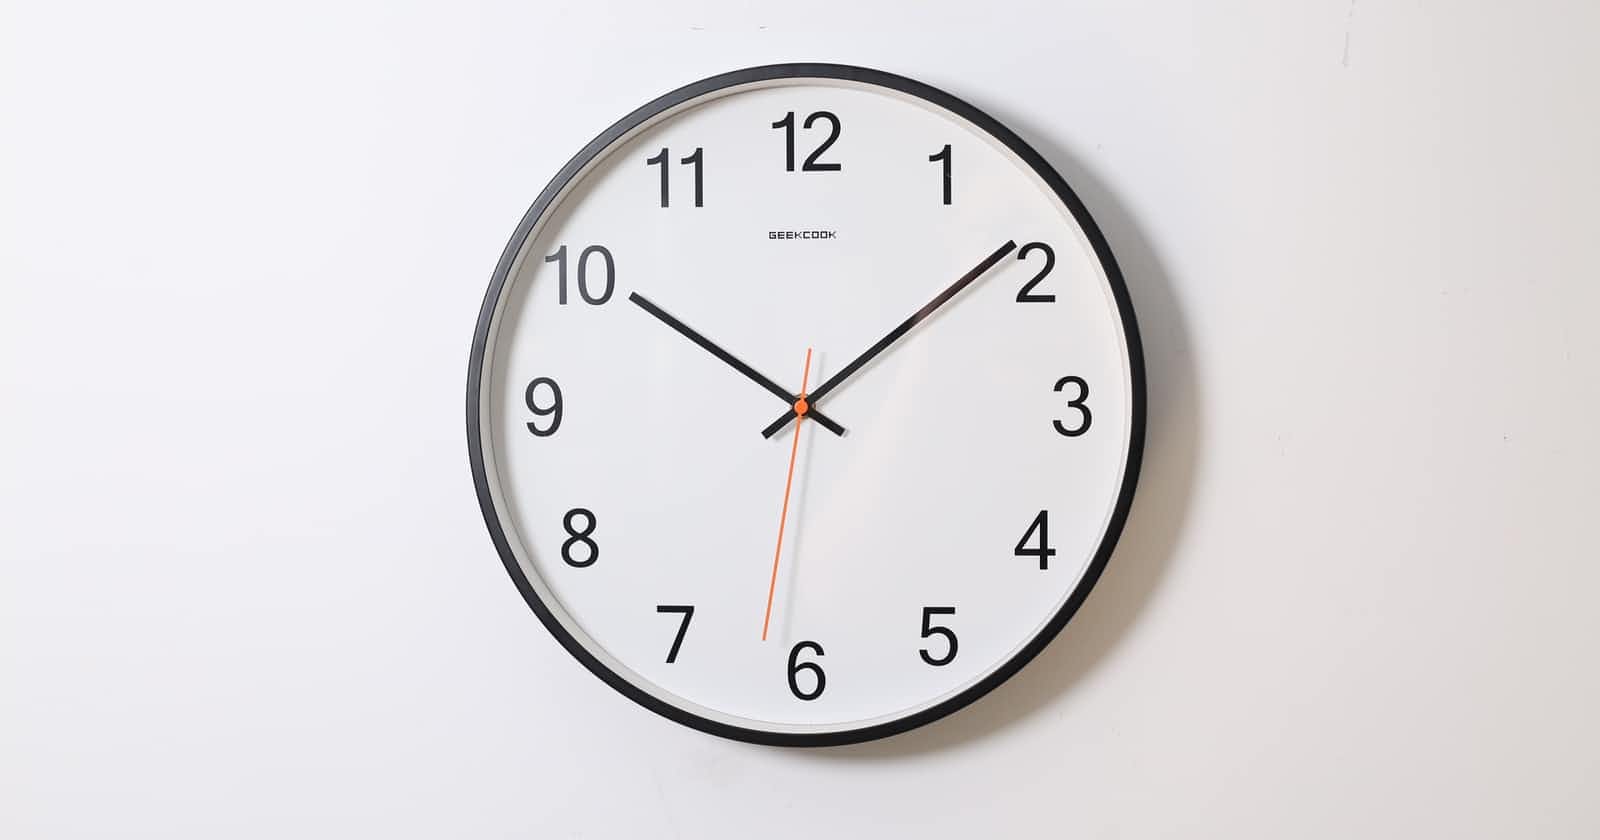 🧑🏻‍🦱 -> Why does a clock rotate in the clockwise direction?